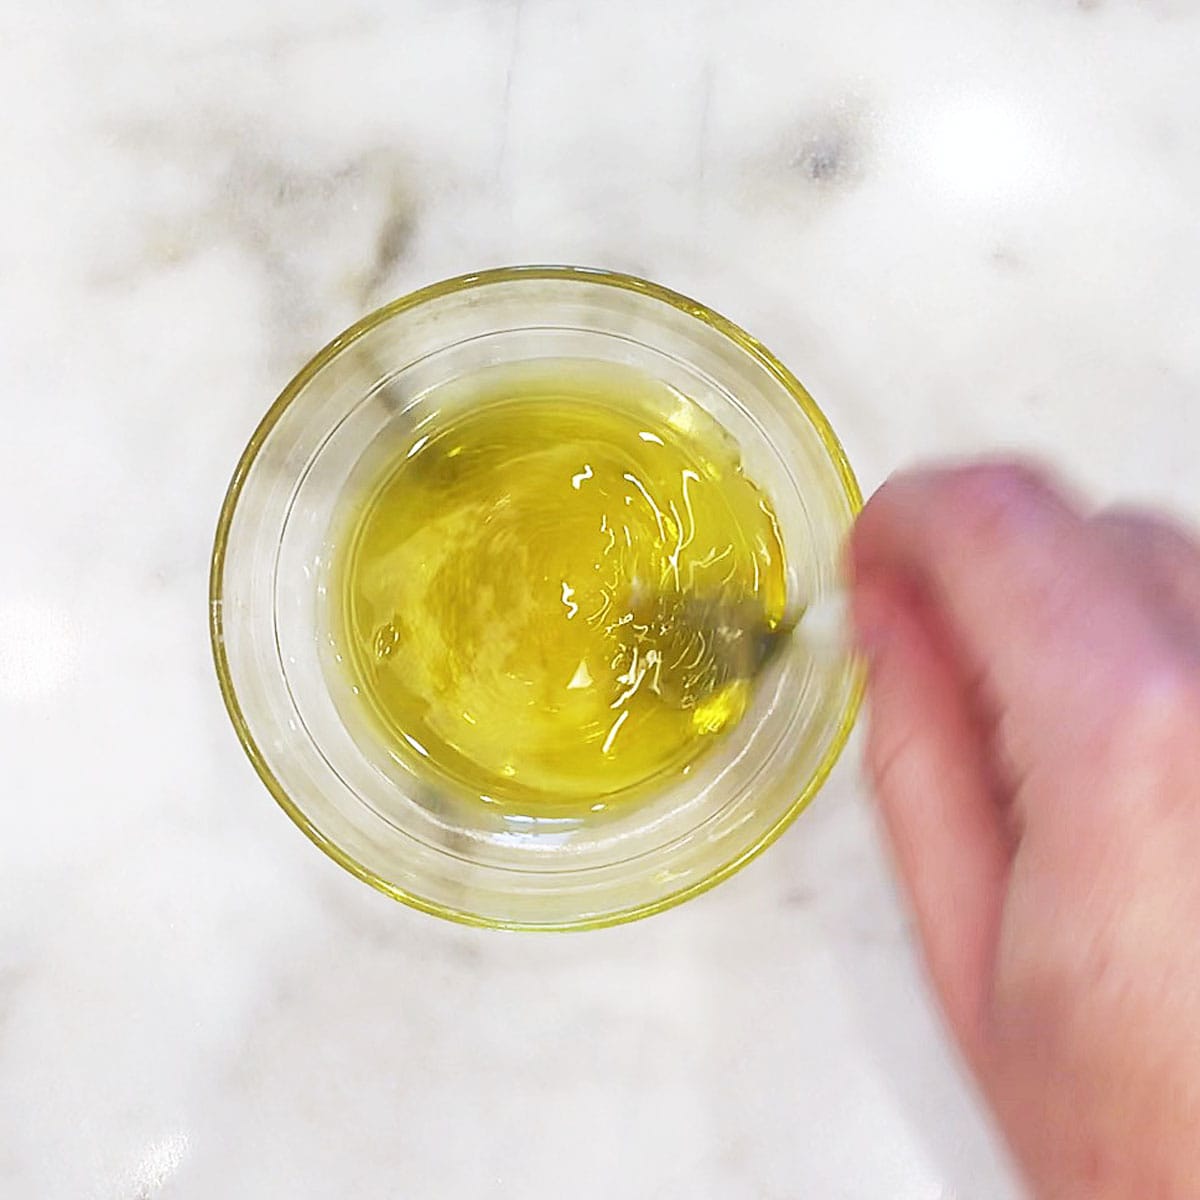 Mixing olive oil and vinegar in a small bowl.